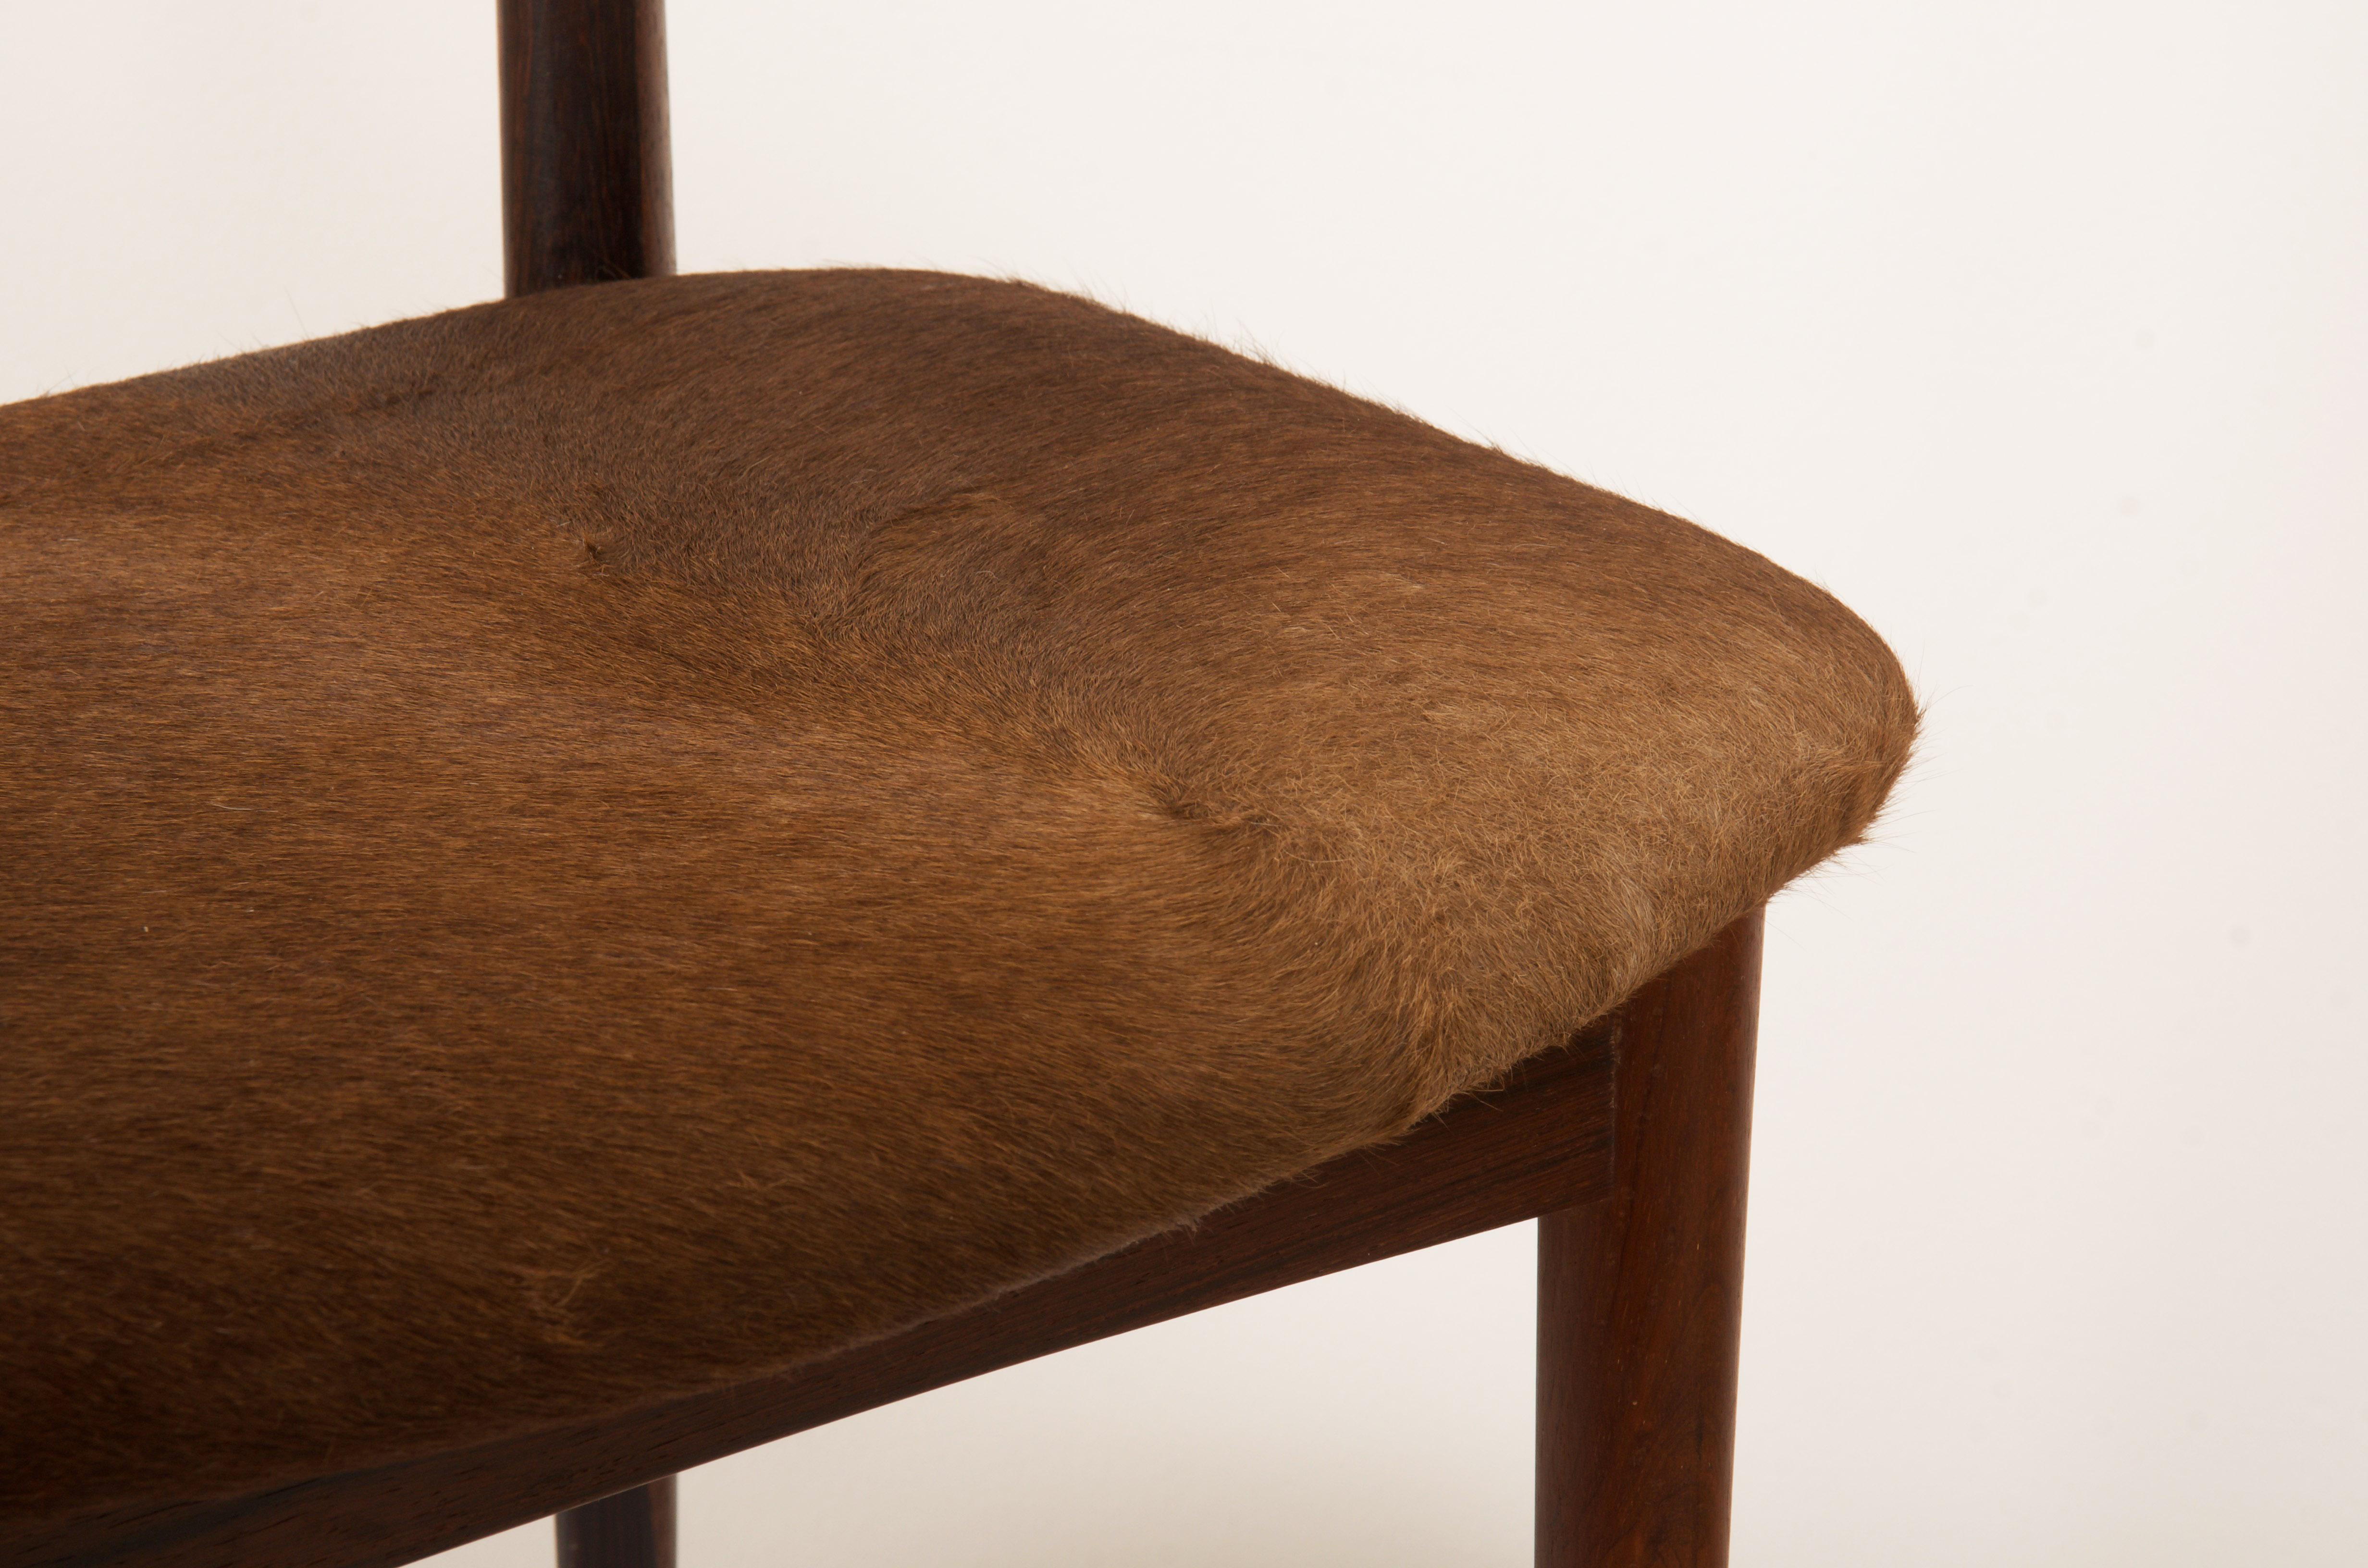 Cowhorn style hardwood dining chair designed by Helge Sibast and Borge Rammeskov for Sibast Mobler, circa 1960s. Elegant carved backs with brass mountings upholstered with brown cowhide.